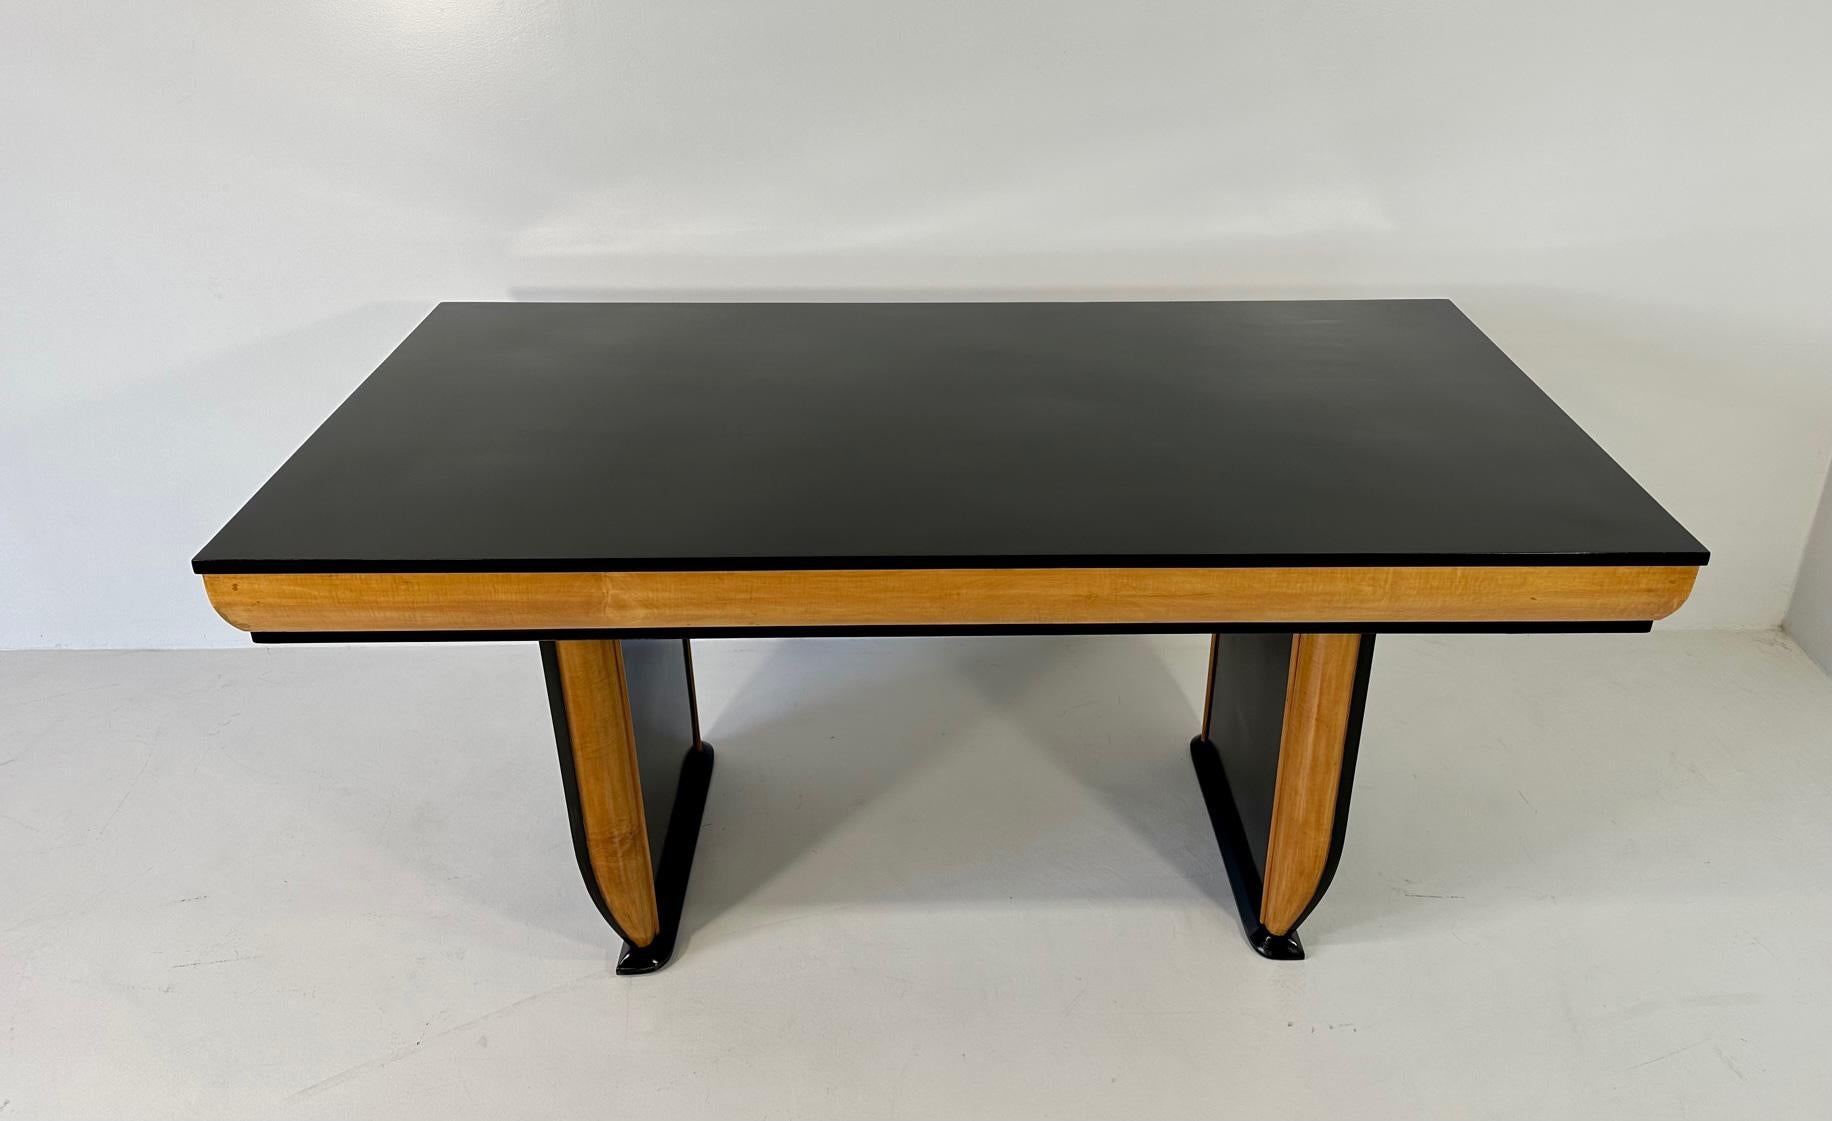 Mid-20th Century Italian Art Deco Black Lacquer and Maple Table, attr. to Borsani, 1940s For Sale